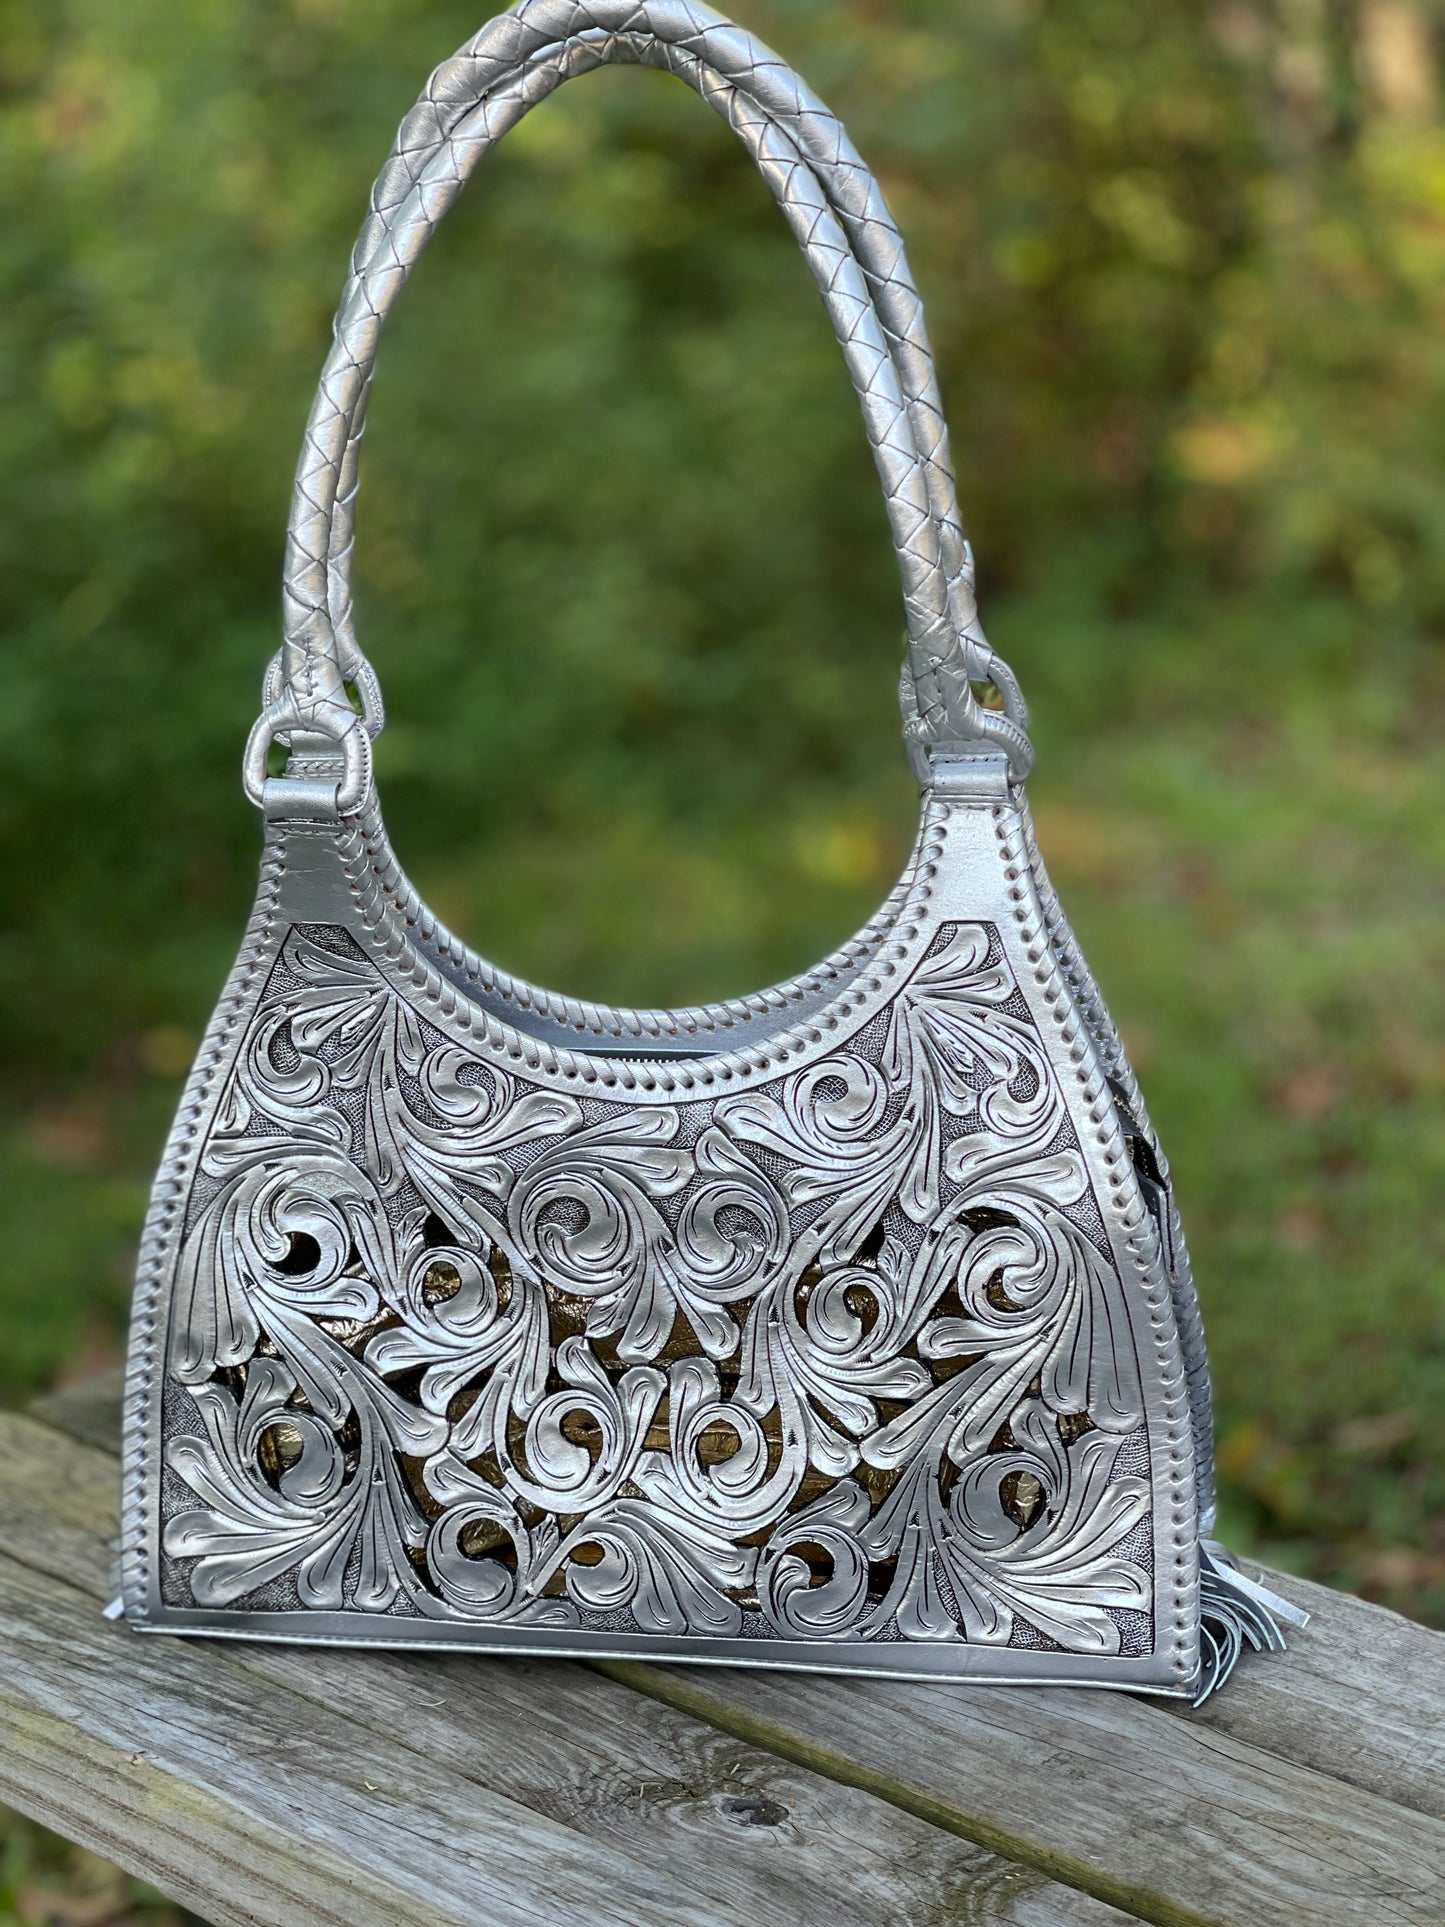 Hand Cut Out Tooling Leather Hobo Bag "LUNA" by ALLE - ALLE Handbags